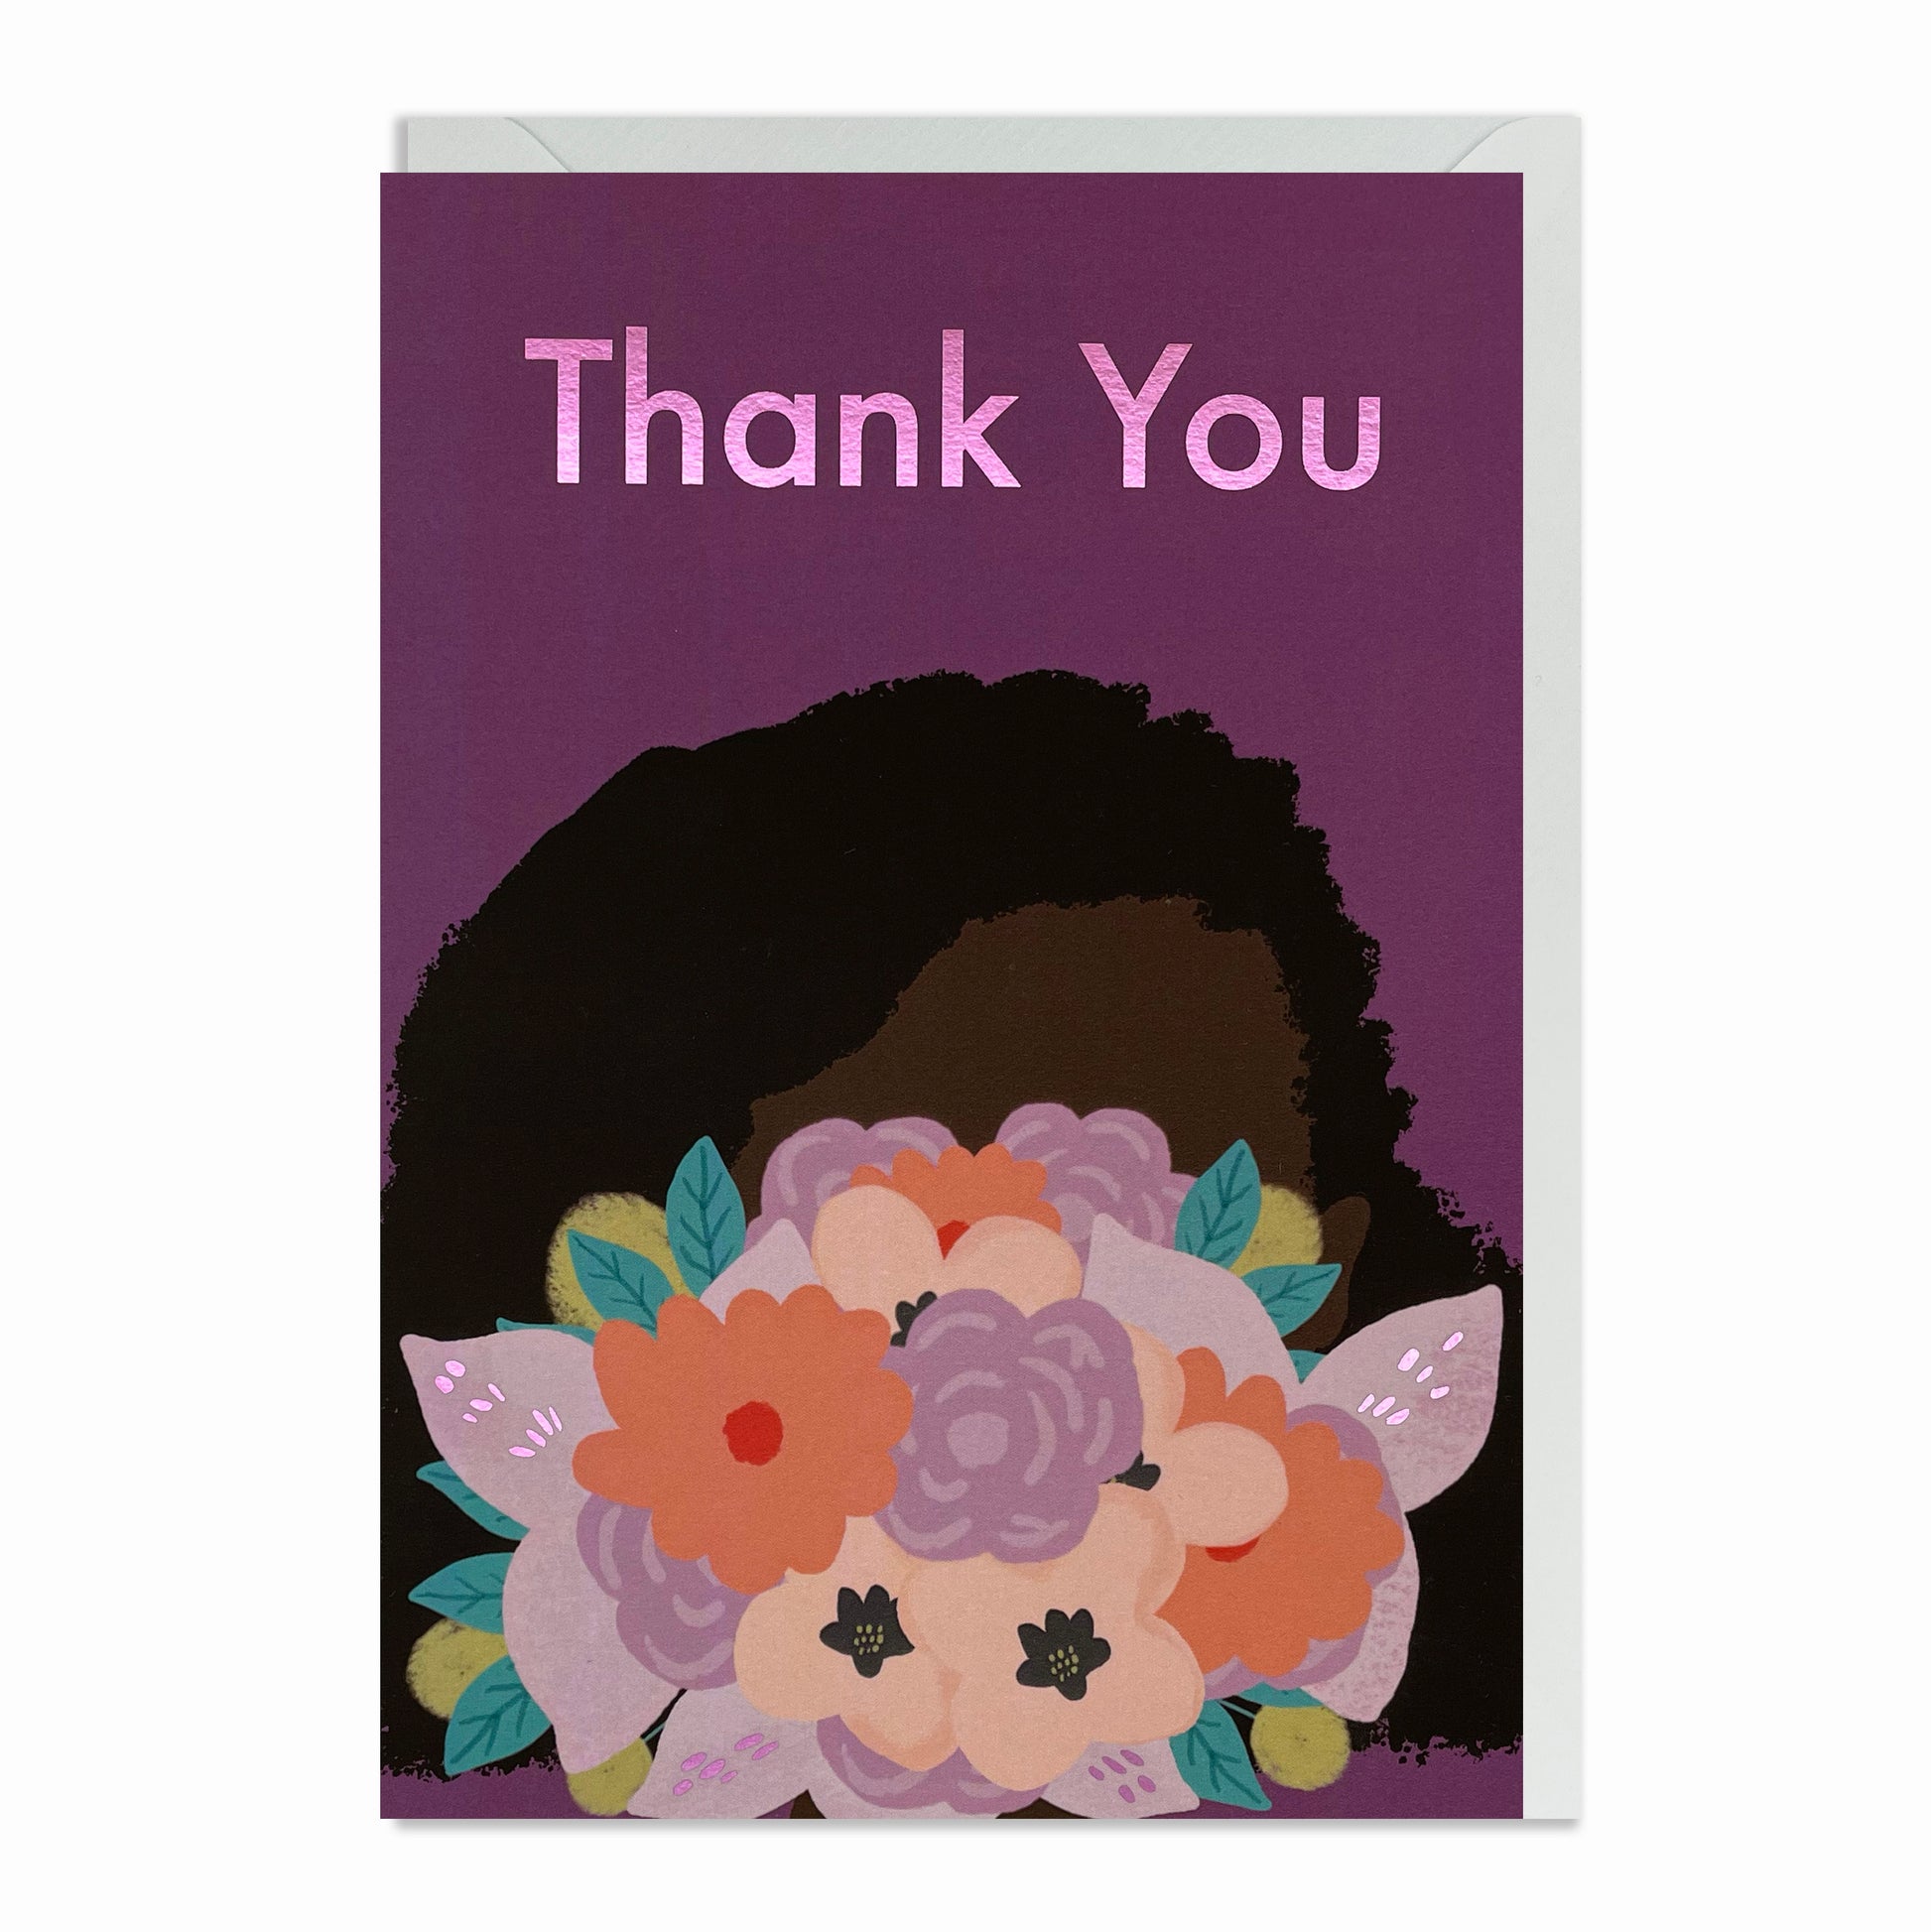 Black Woman  hiding her face behind a bouquet of beautiful colourful flowers. Black Greeting Card